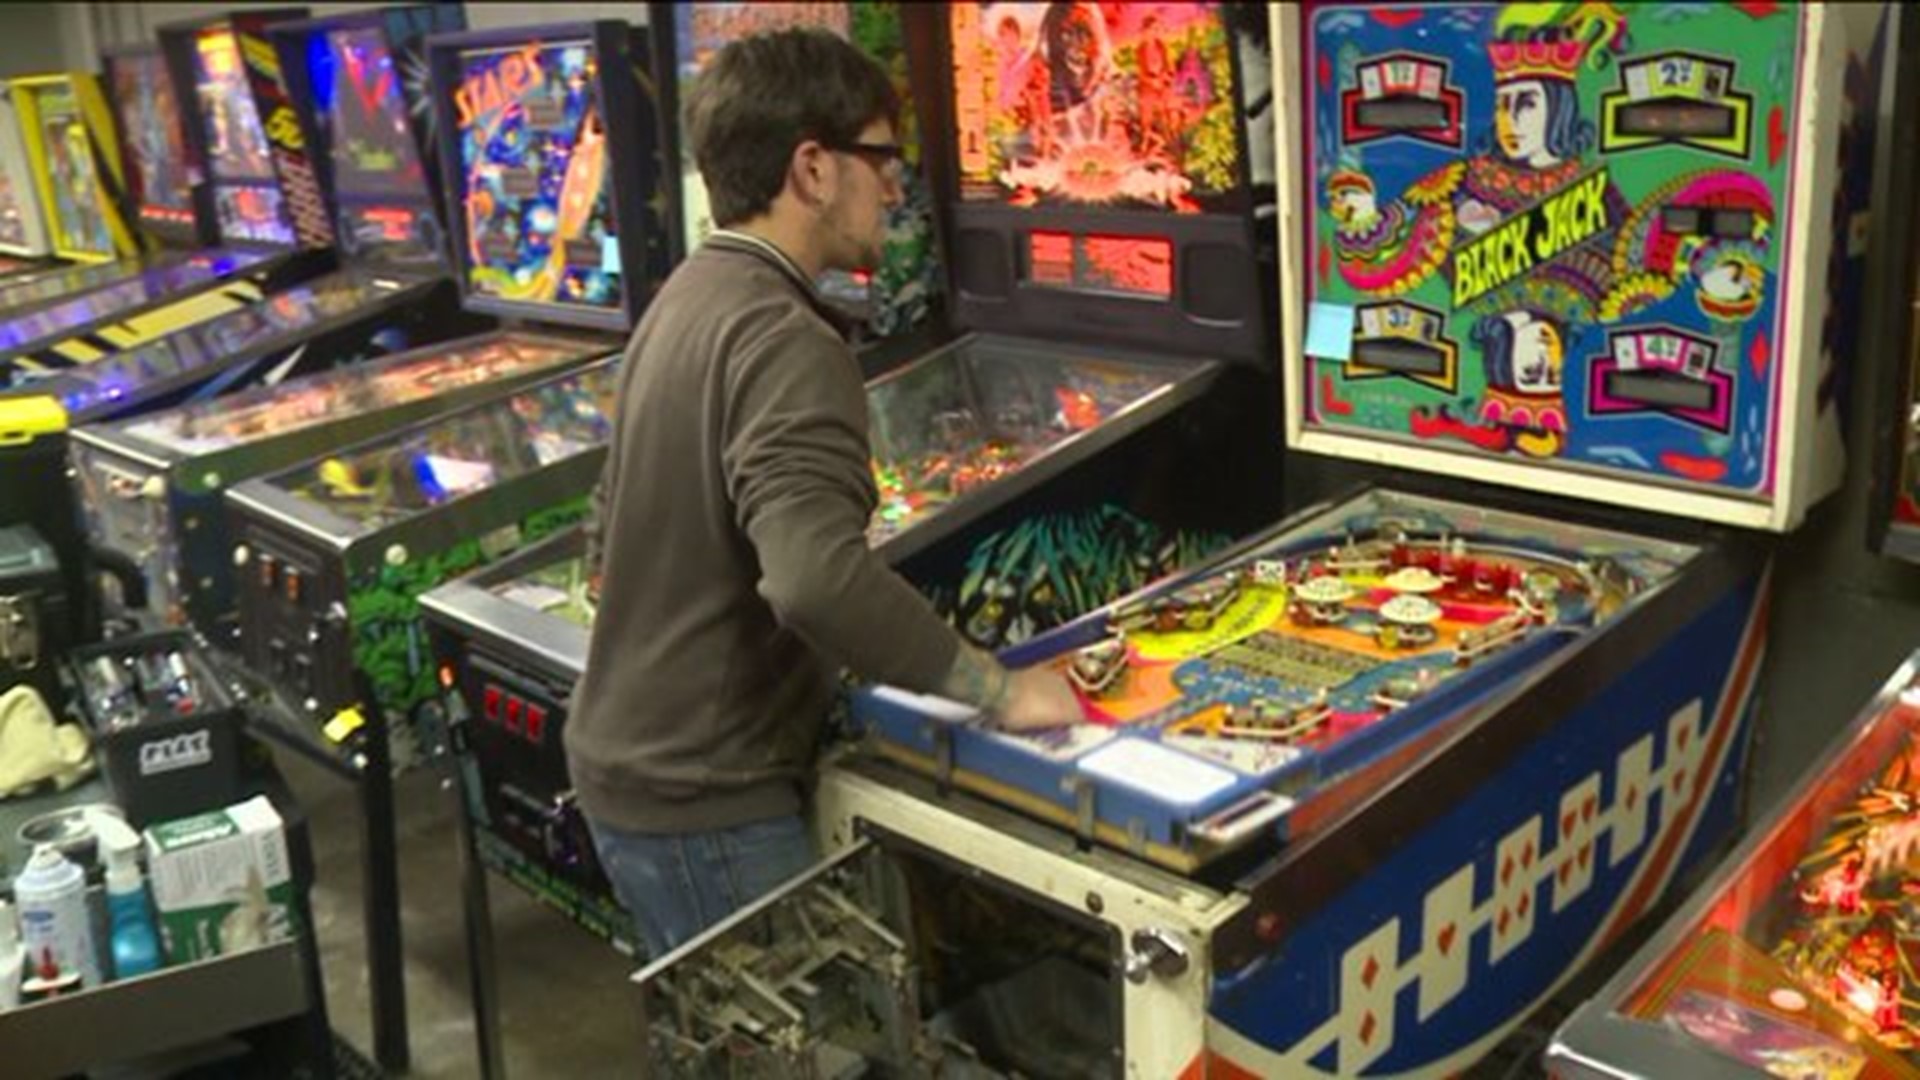 A pinball revival right around the corner